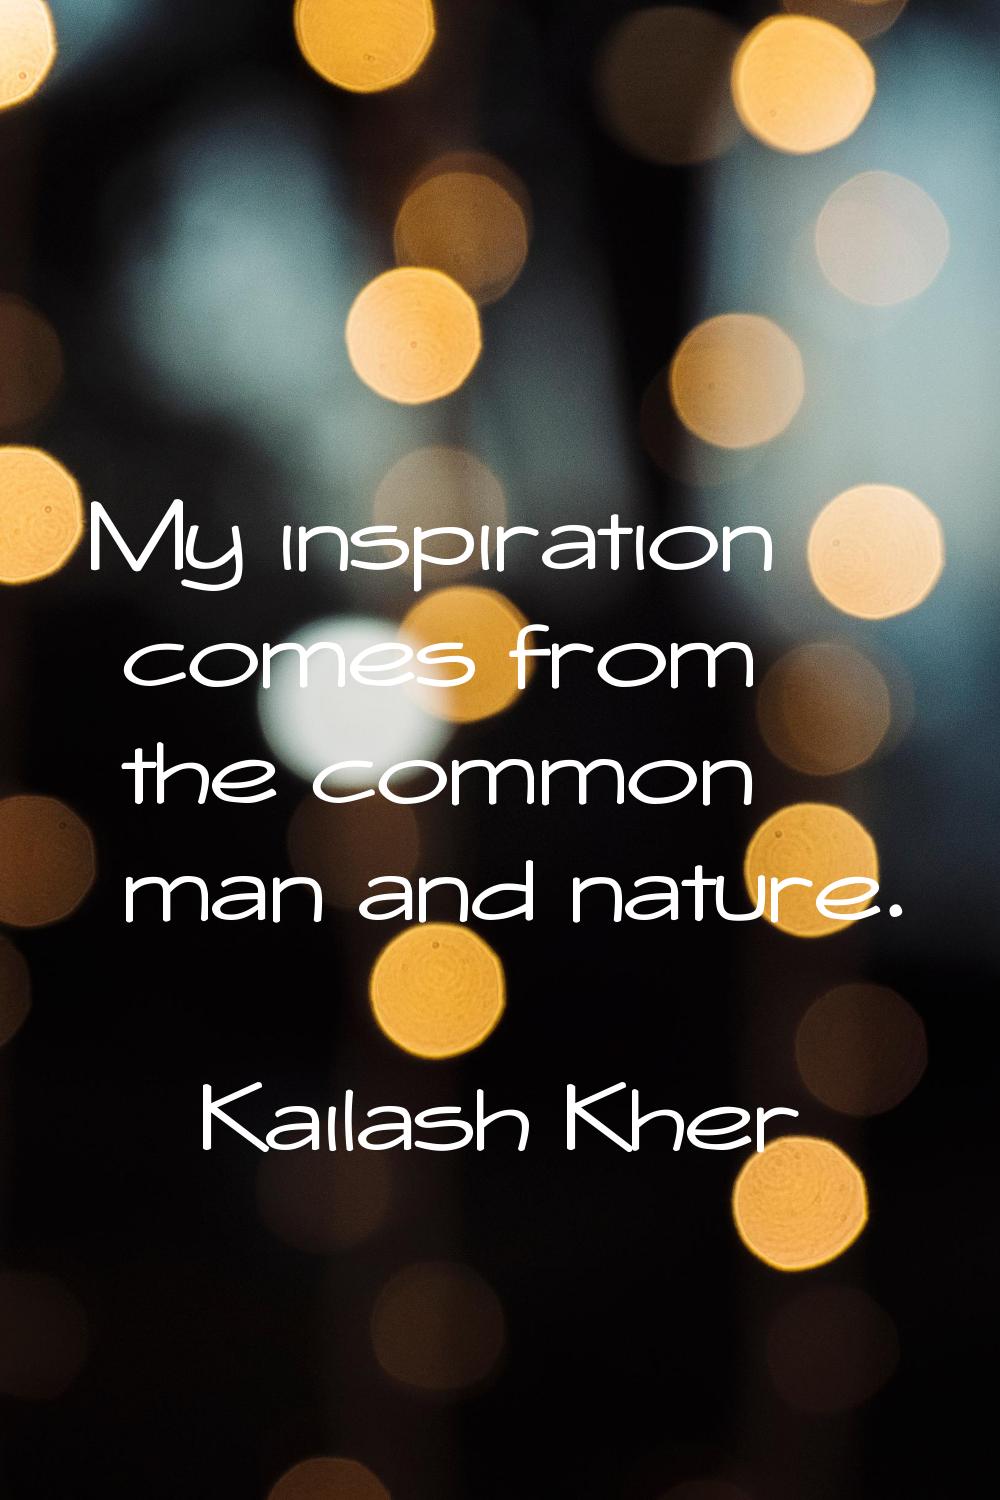 My inspiration comes from the common man and nature.